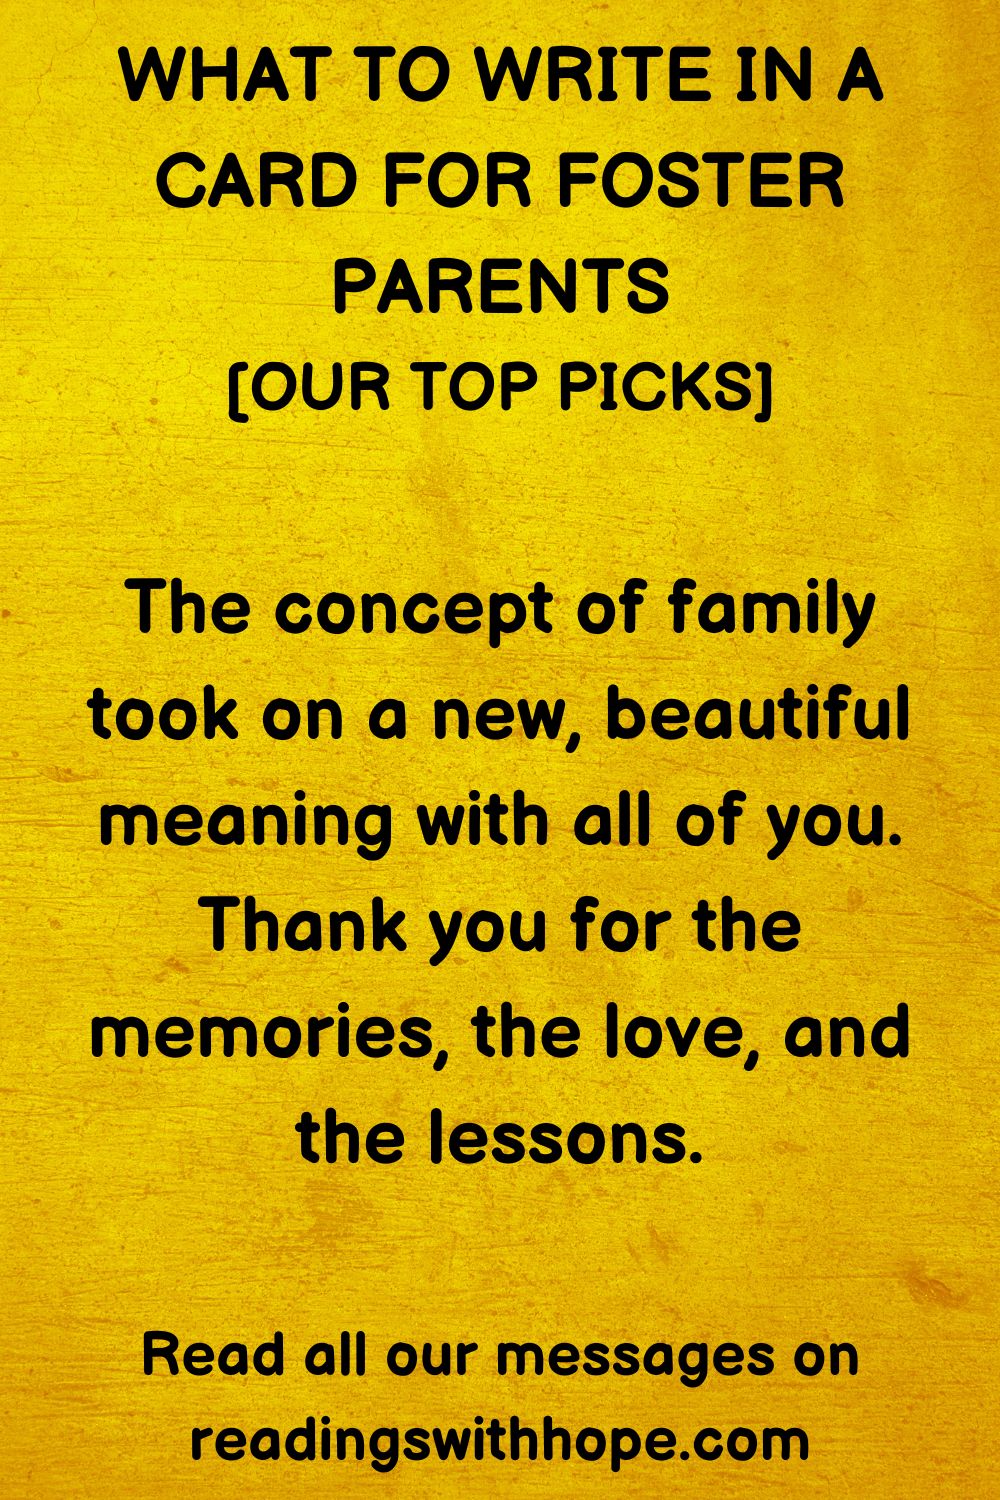 What to Write in a Card for Foster Parents